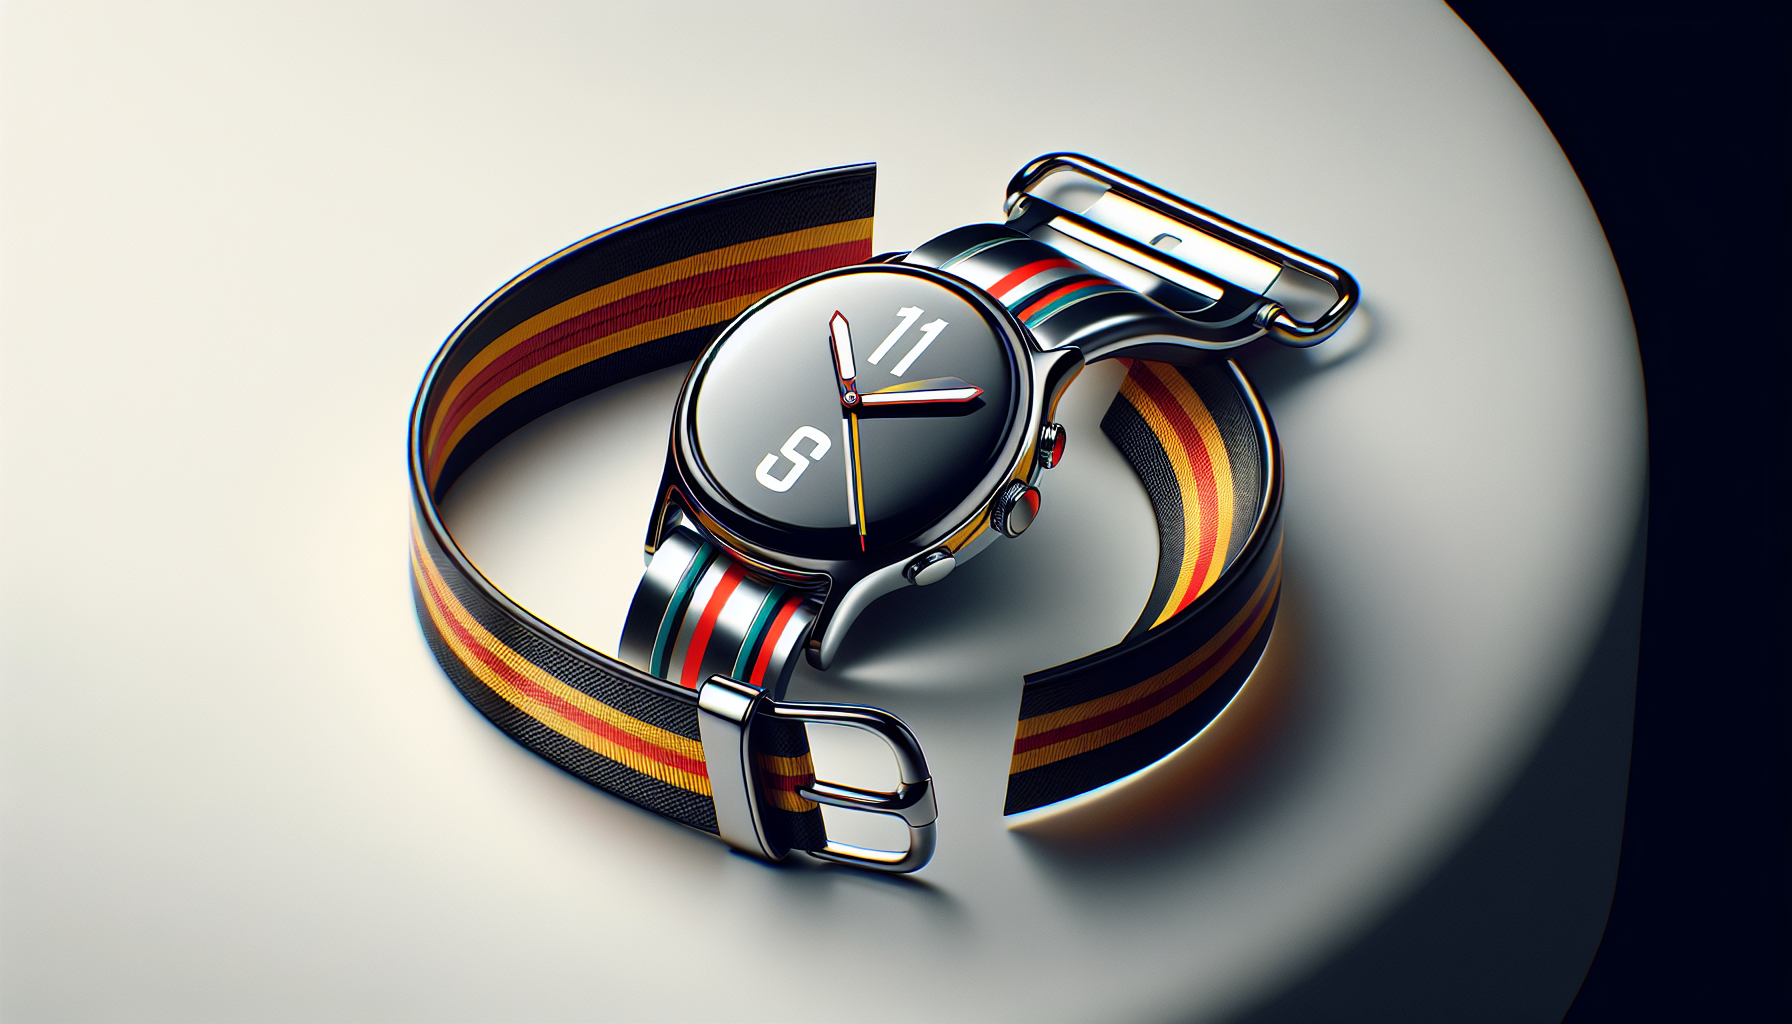 Illustration of Apple Watch with racing watch strap